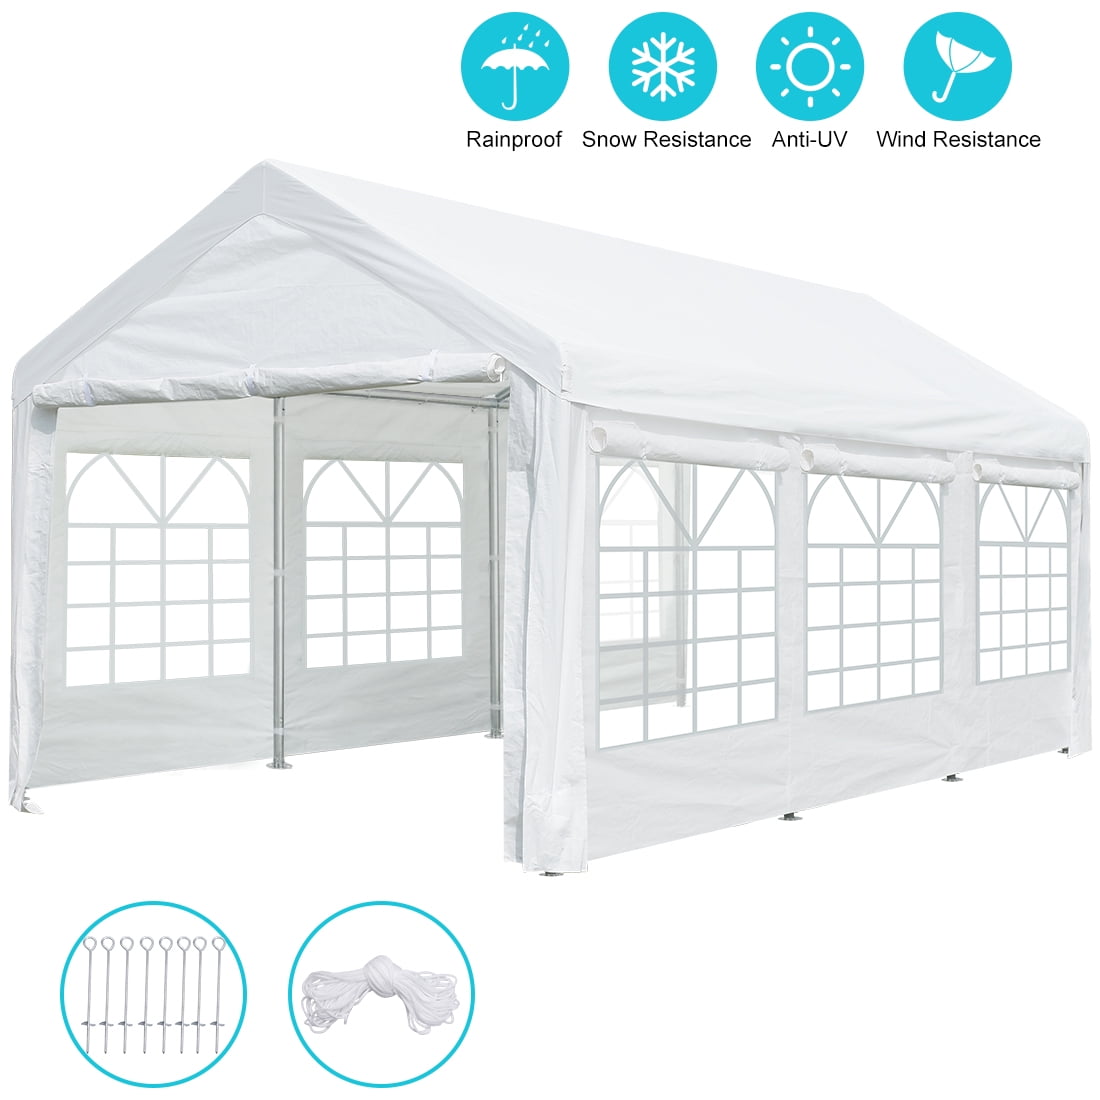 Details about   10'x 20' Heavy Duty Carports Party Wedding Tent Car Canopy Garage Boat Shelter 